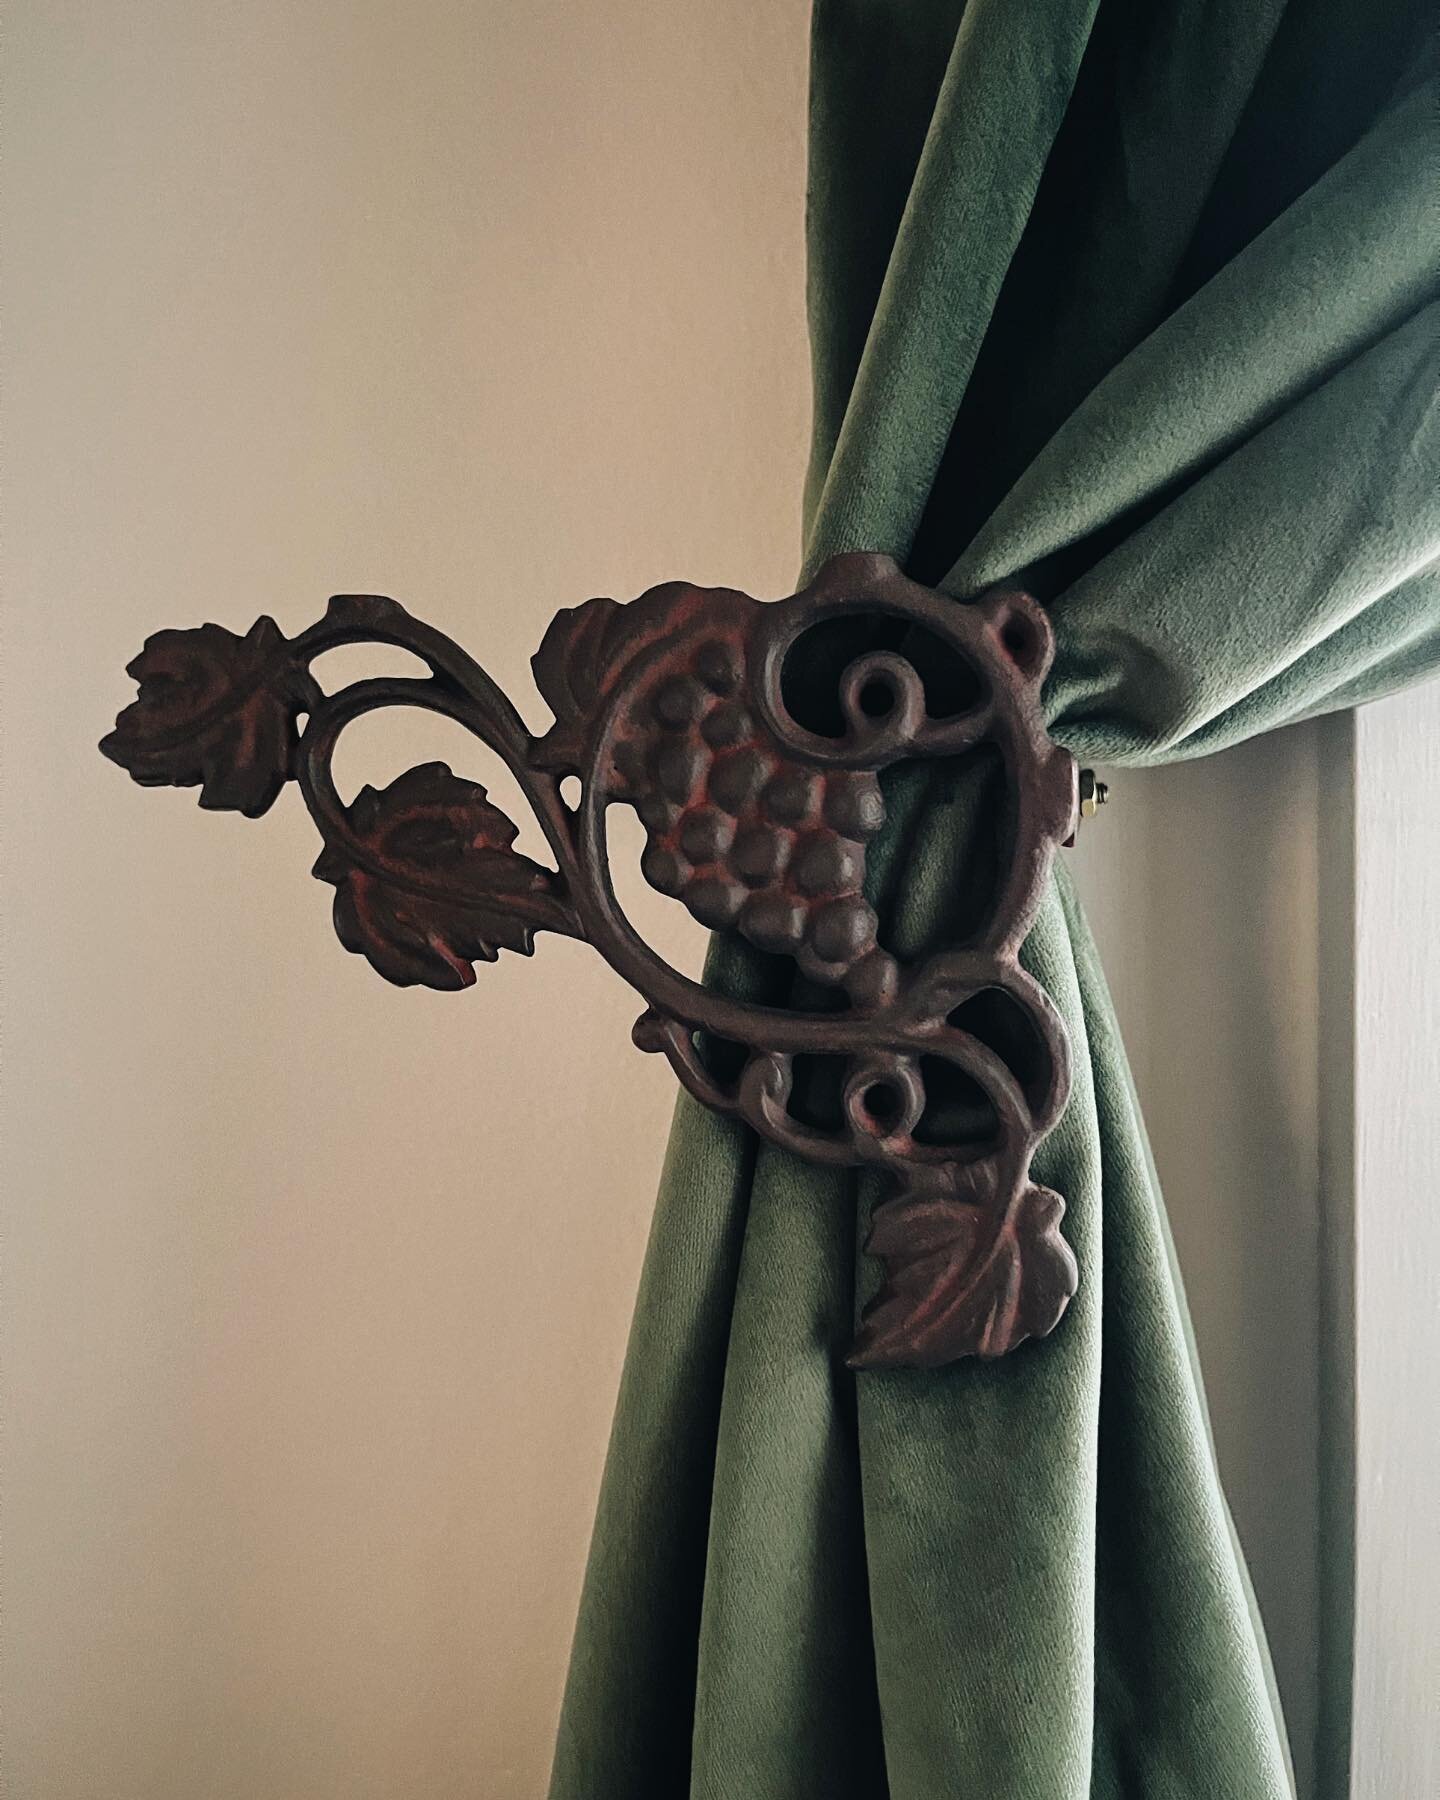 It&rsquo;s the little details you&rsquo;ll catch that pay tribute to Folino Estate, where it all began. We&rsquo;re almost complete remodeling our Barbera Room and can&rsquo;t wait to share it! Stay tuned!